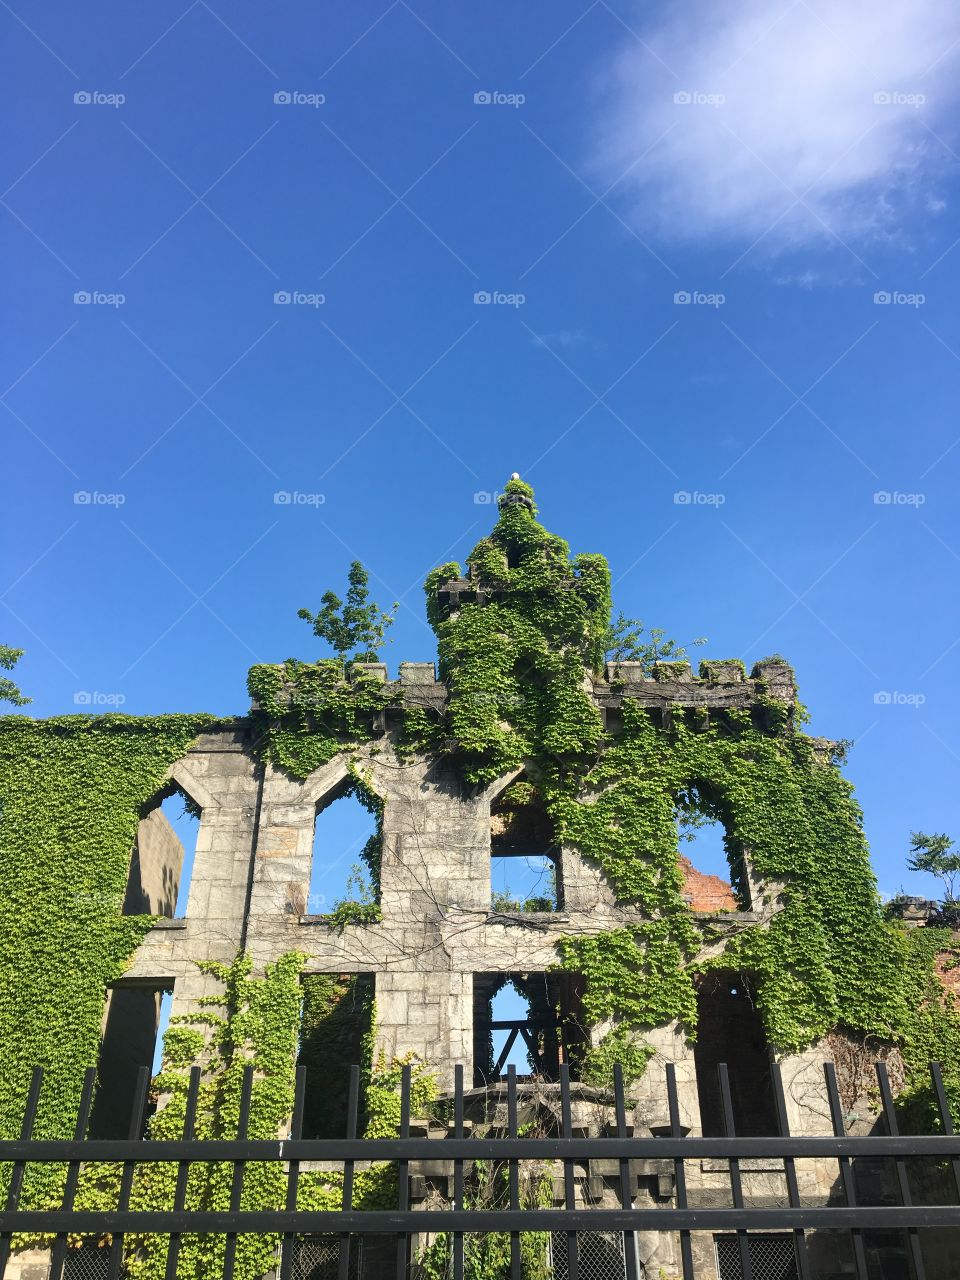 Tb hospital ruins with blue sky and greenery growing over structure point of view 1